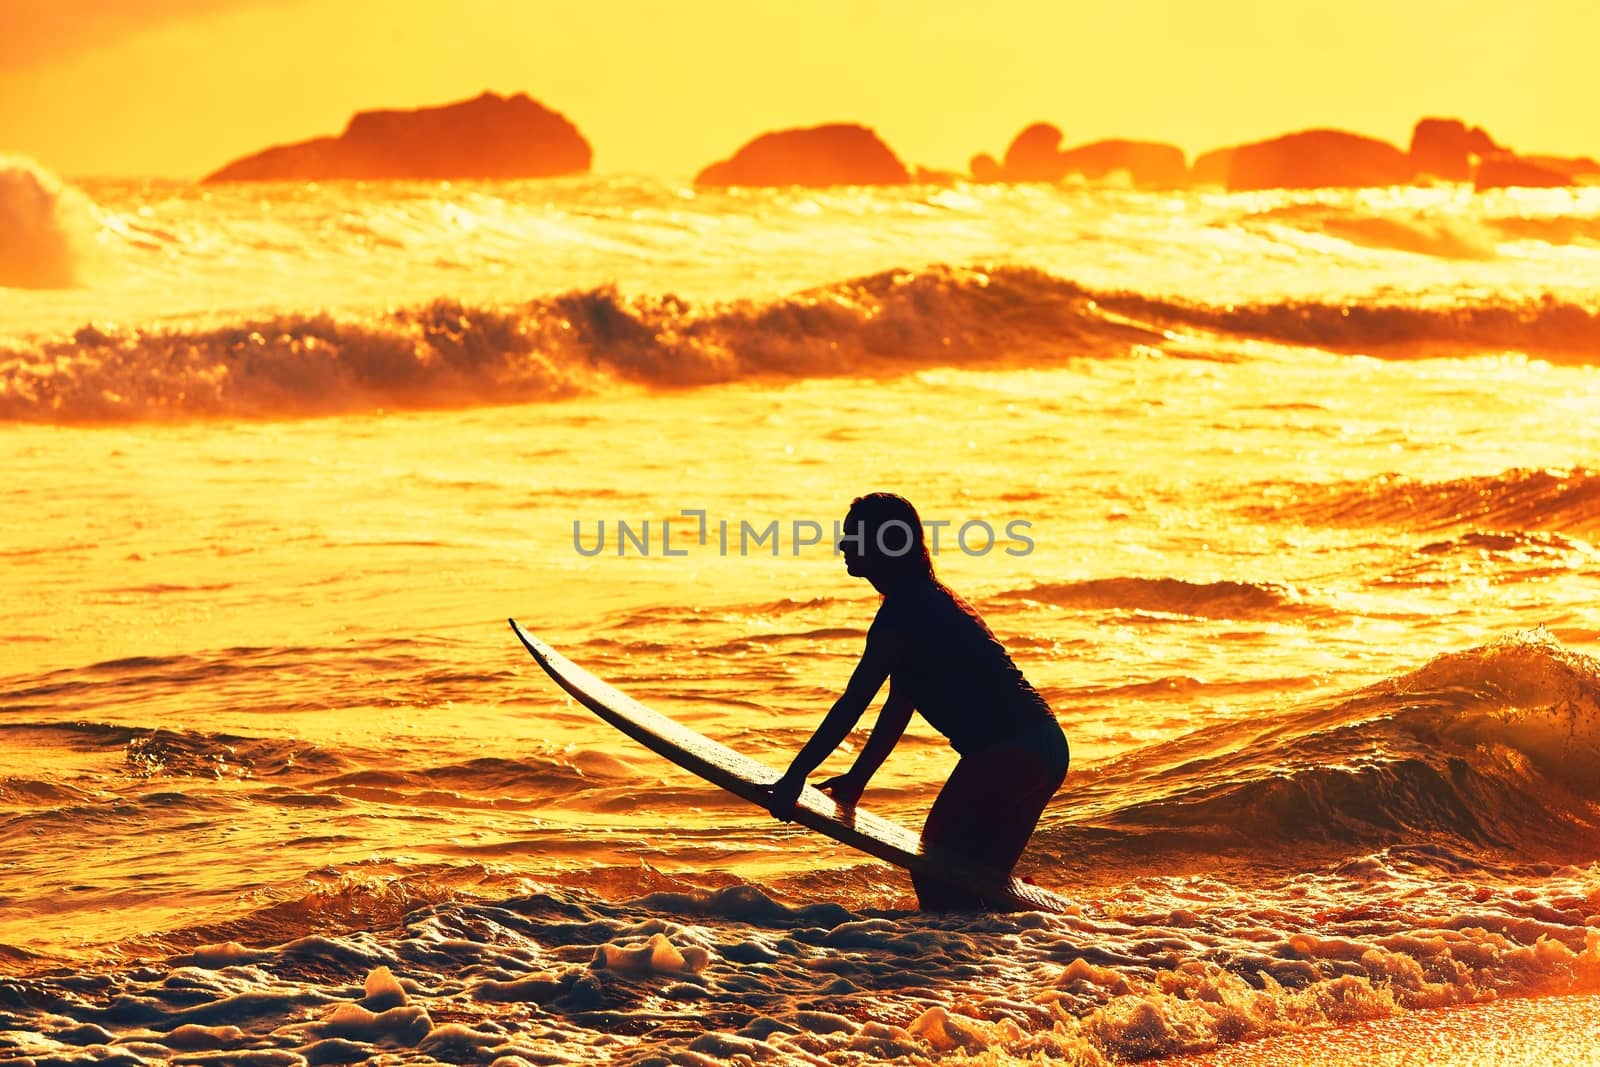 Silhouette of the beautiful surfer girl is enjoying vacation on the tropical beach. Young woman with surfboard at golden sunset. Sri Lanka. - back lit